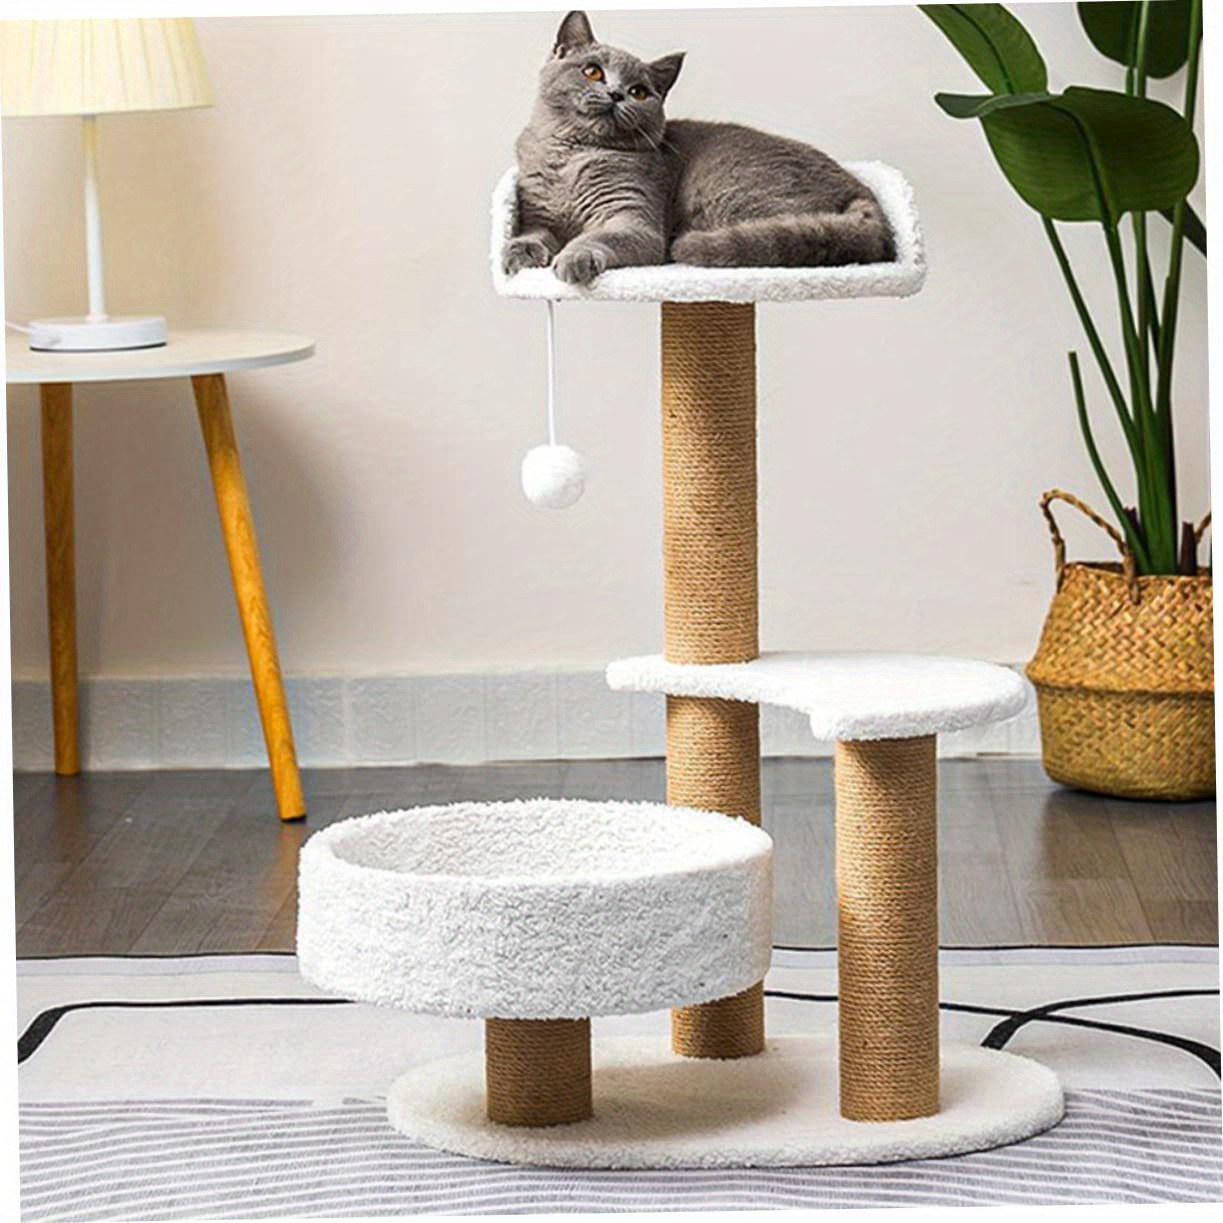 

Multi-level Cat Tree With Sisal-covered Scratching Posts, Cozy Platform Beds, And Hanging Toy - Durable Sisal Rope Scratcher For Indoor Cats, Compatible Replacement Parts Available